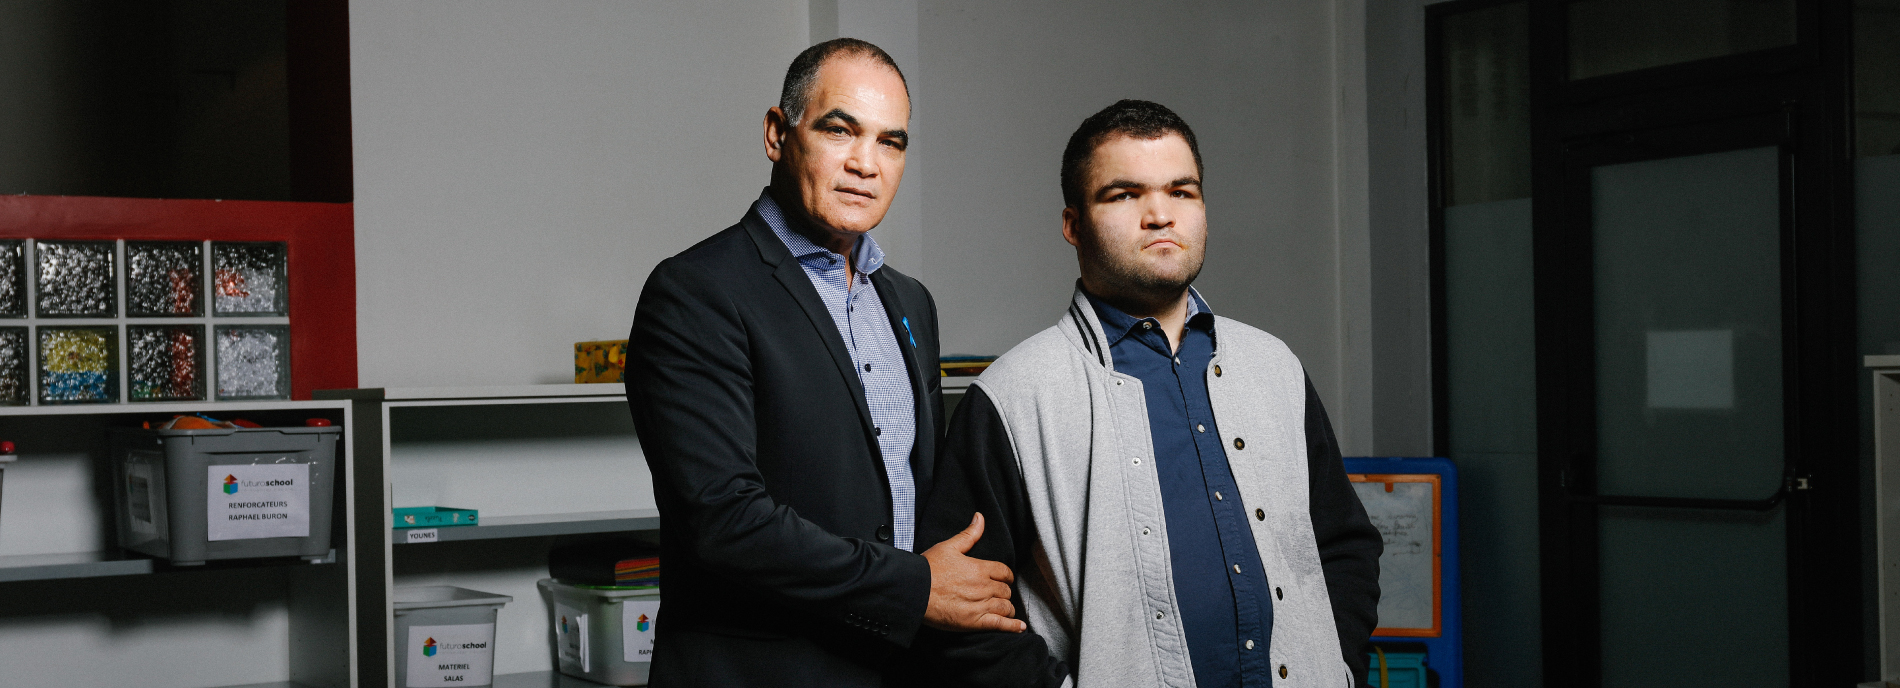 Photo: A father and son stand side by side, looking serious. The father is wearing a dark blue blazer over a grey sweater. The son is wearing a blue and grey jacket.